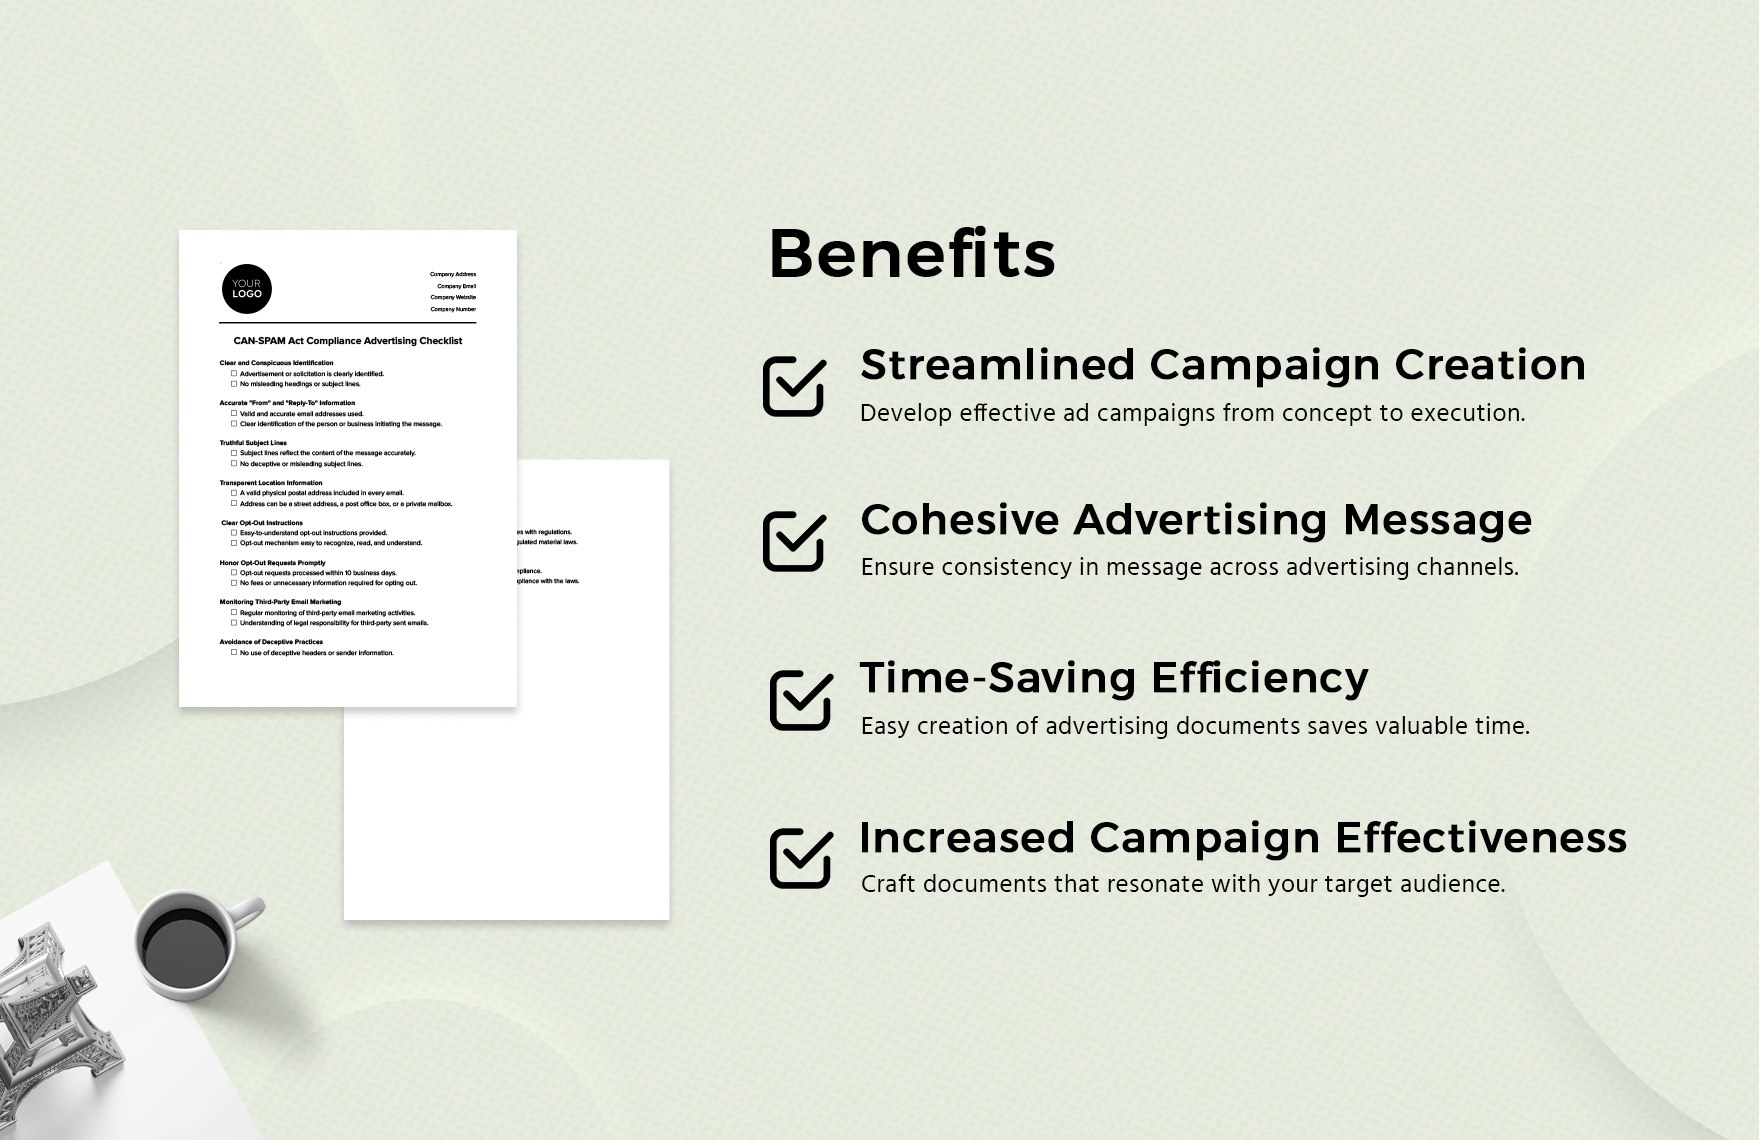 CAN-SPAM Act Compliance Advertising Checklist Template